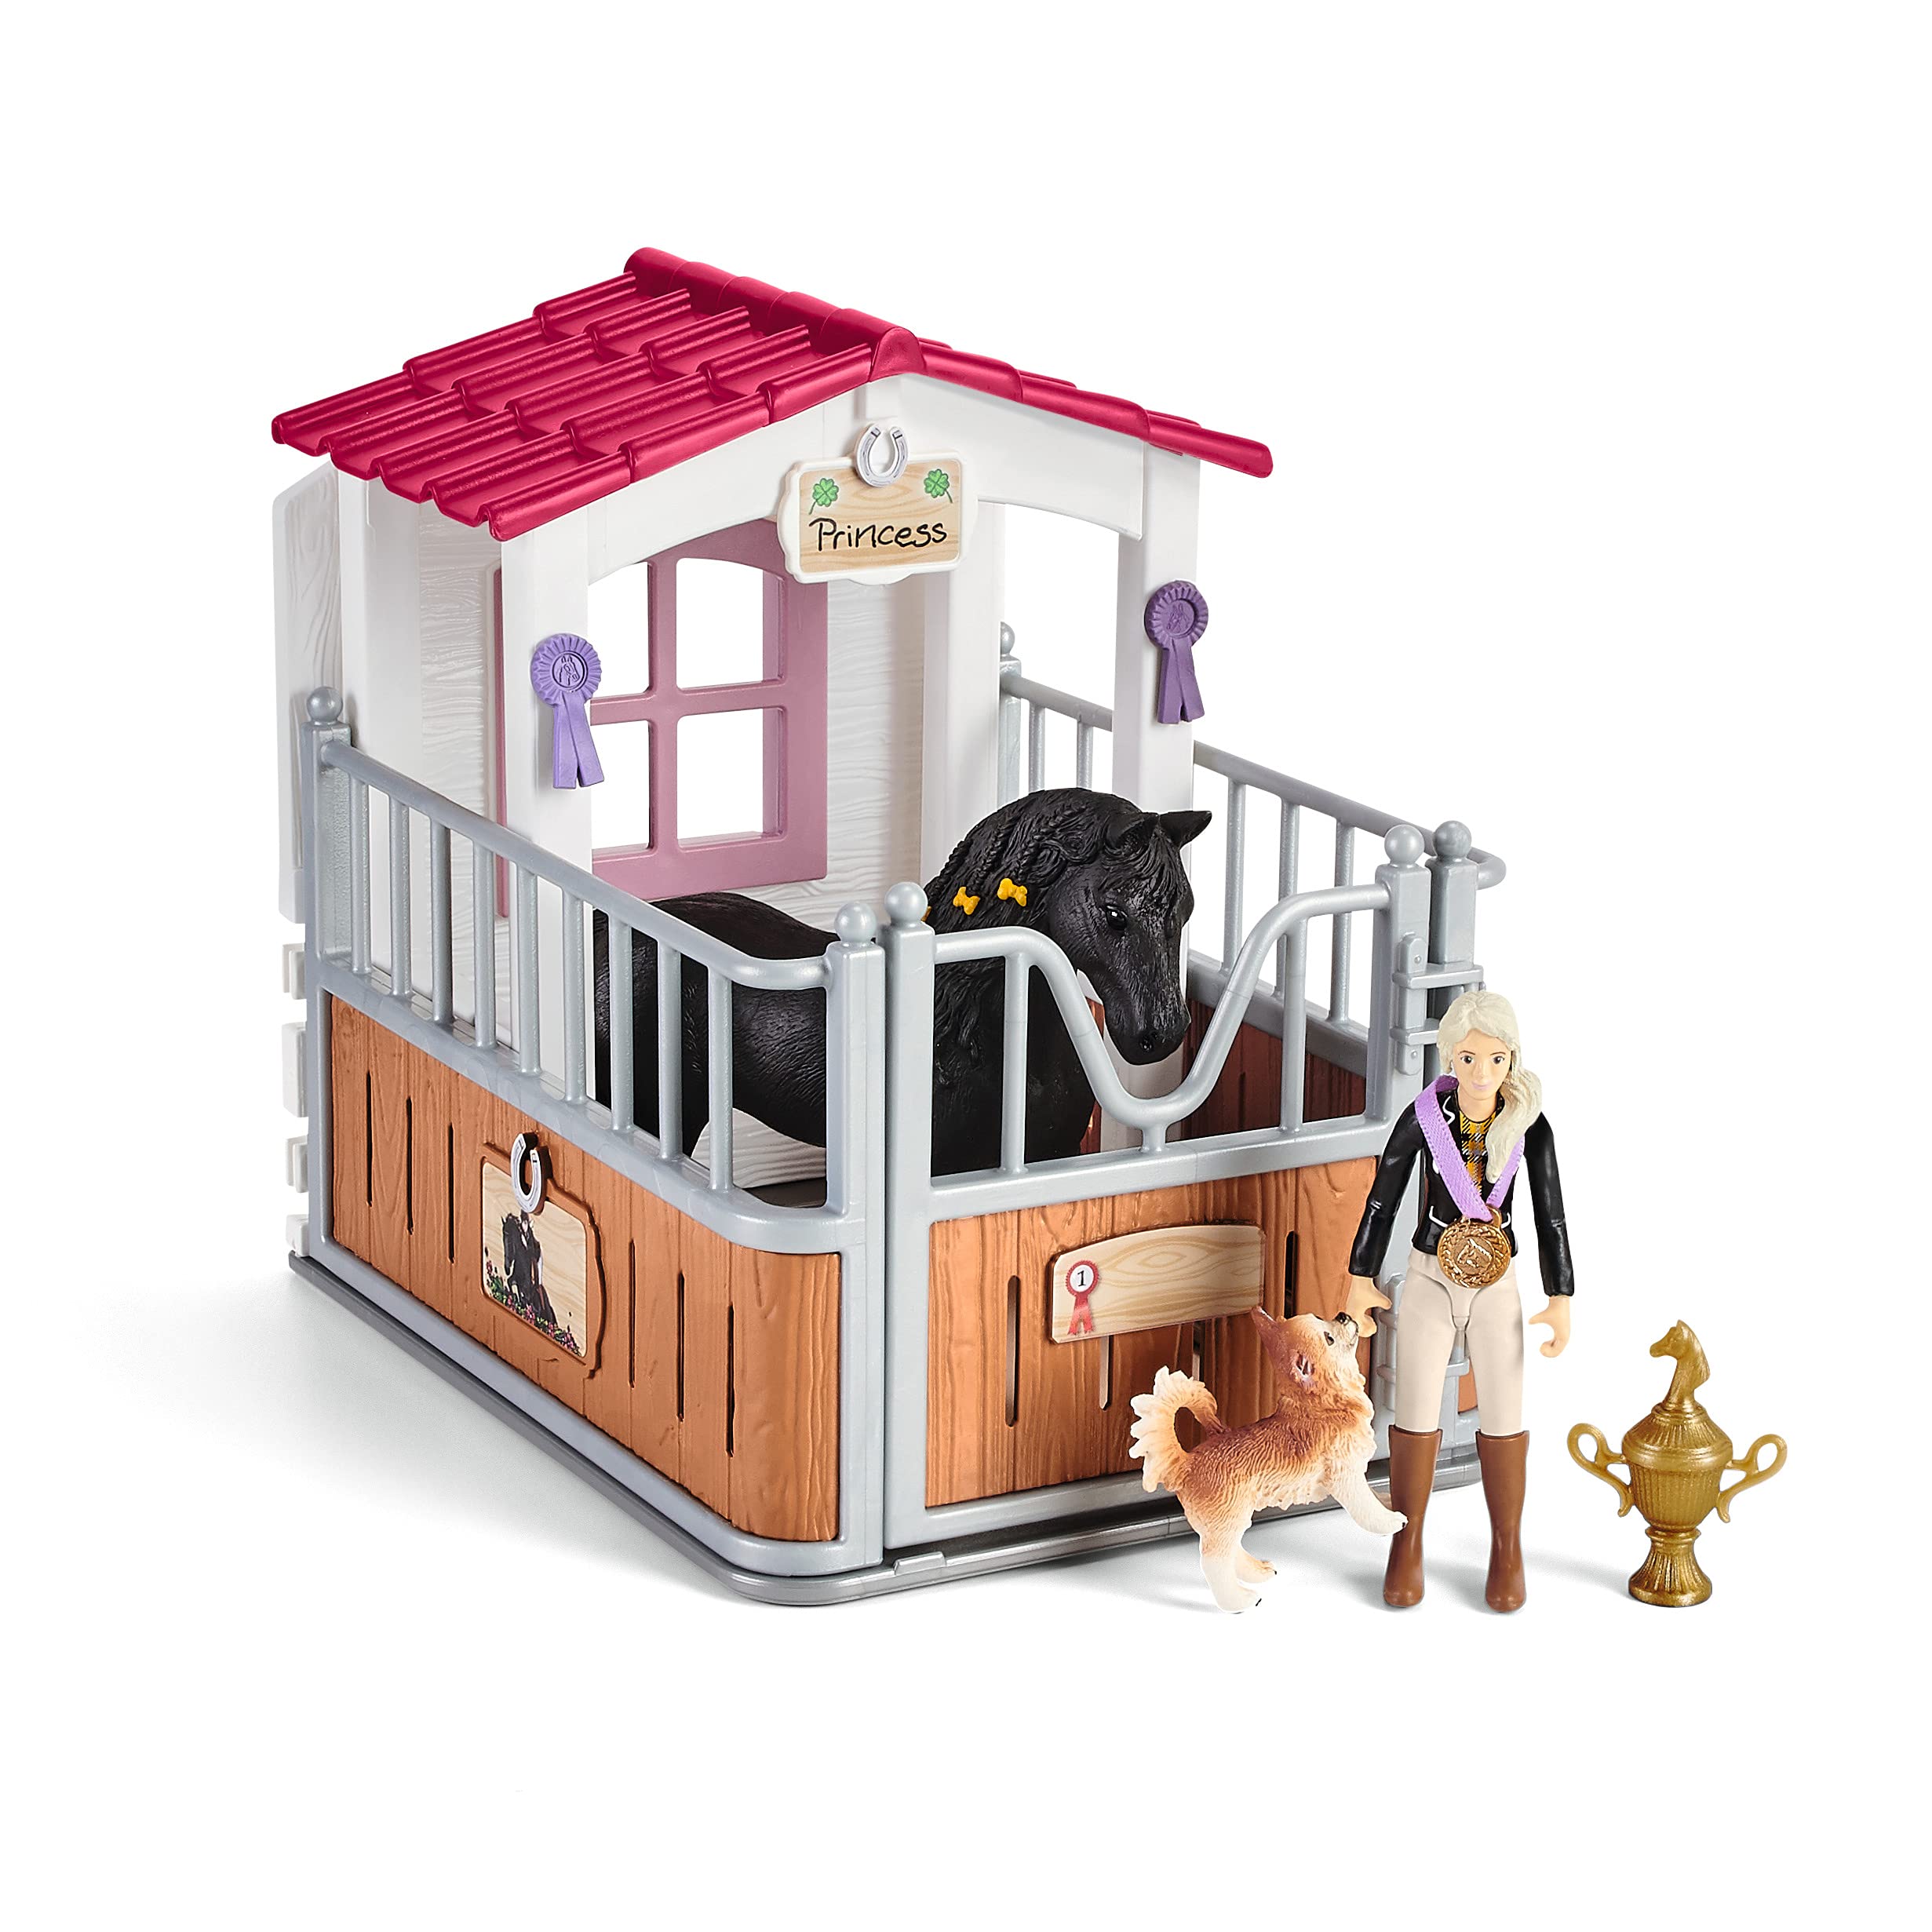 Schleich Horse Club Gifts for Girls and Boys, Horse Stall with Tori and Princess Toy, 15 Pieces, Ages 5+